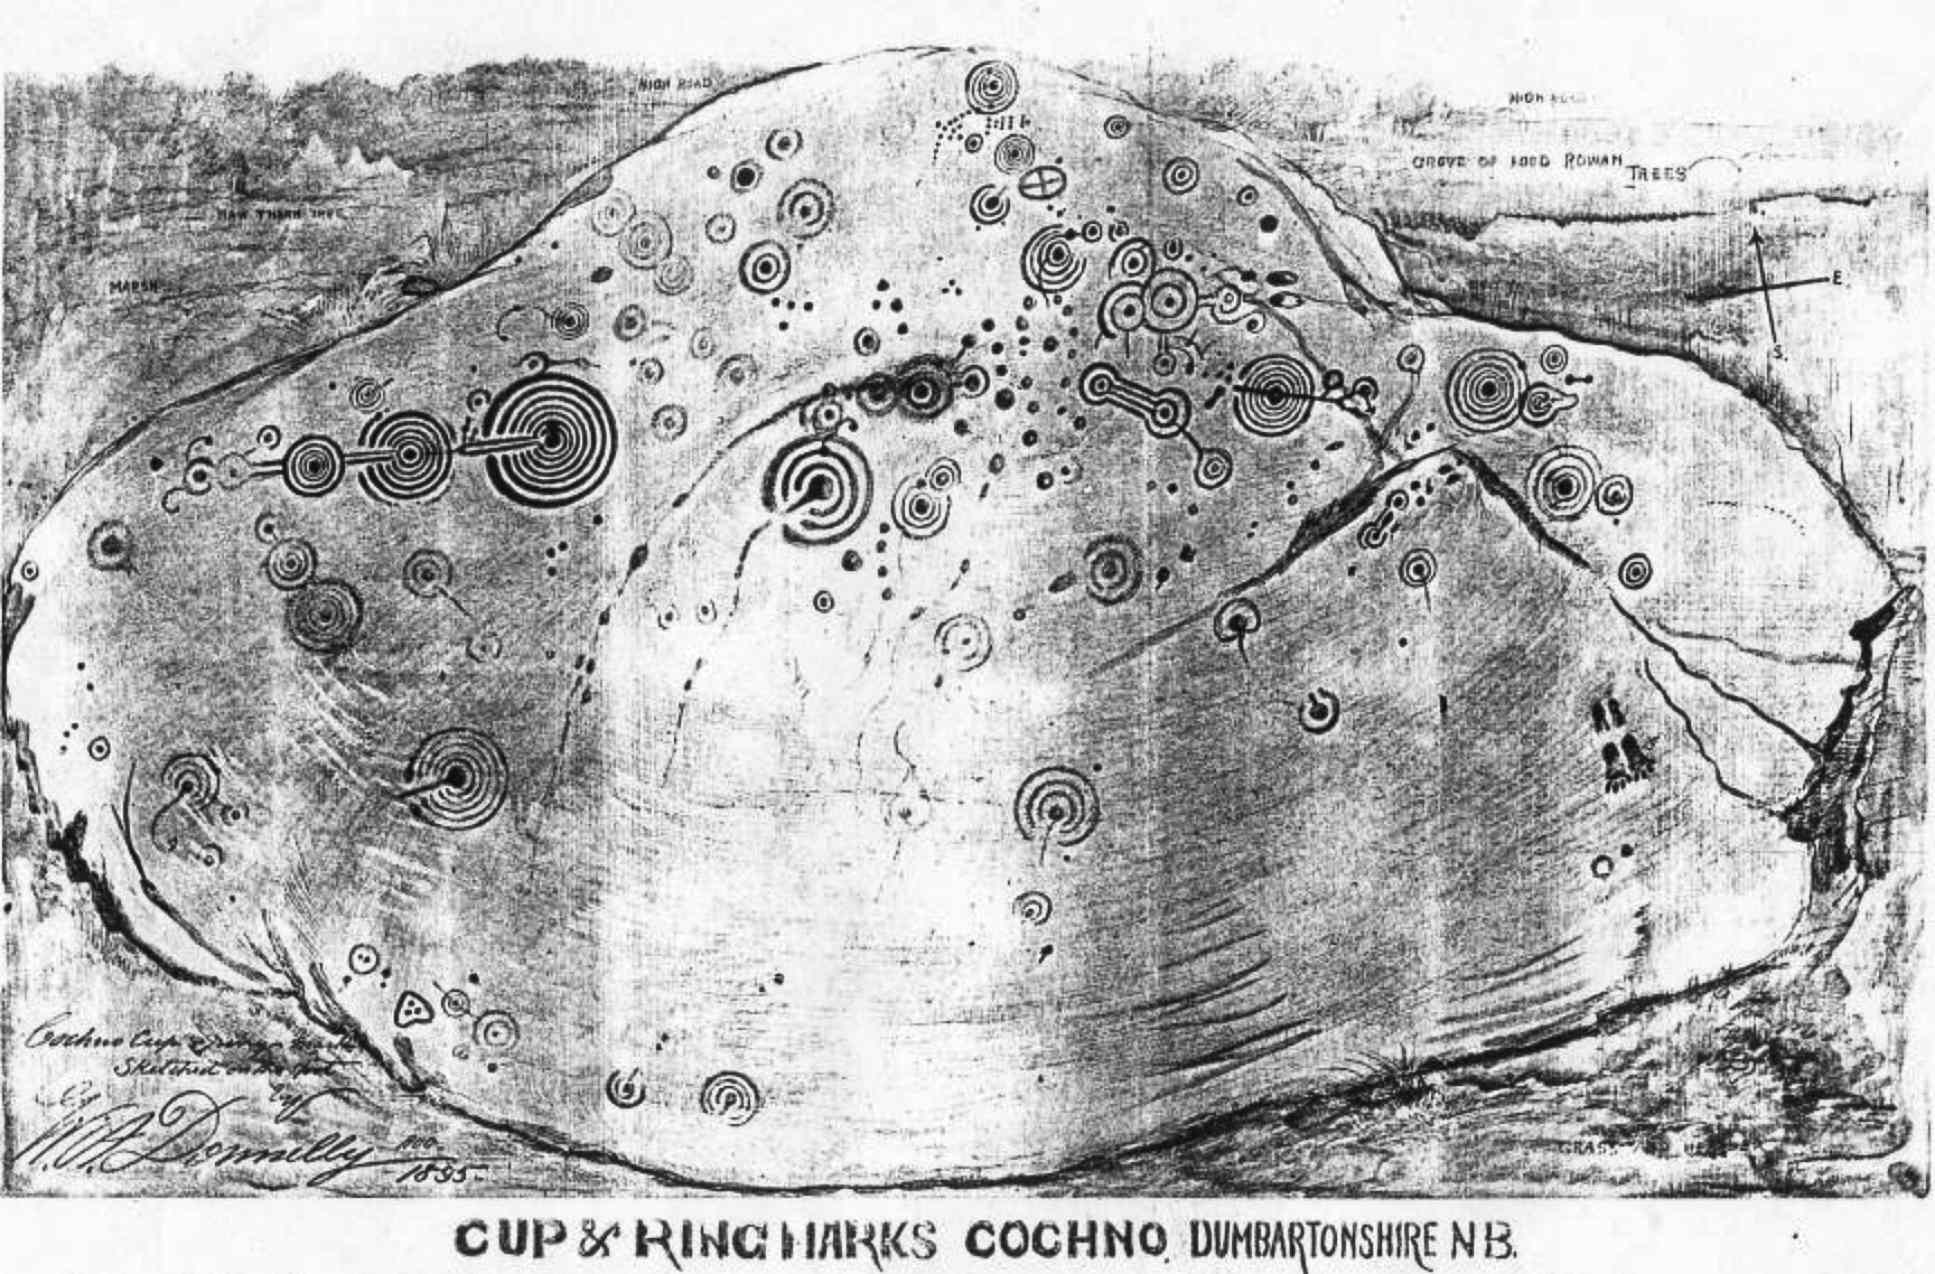 A Sketch of the Cochno Stone by W A Donnelly in 1895